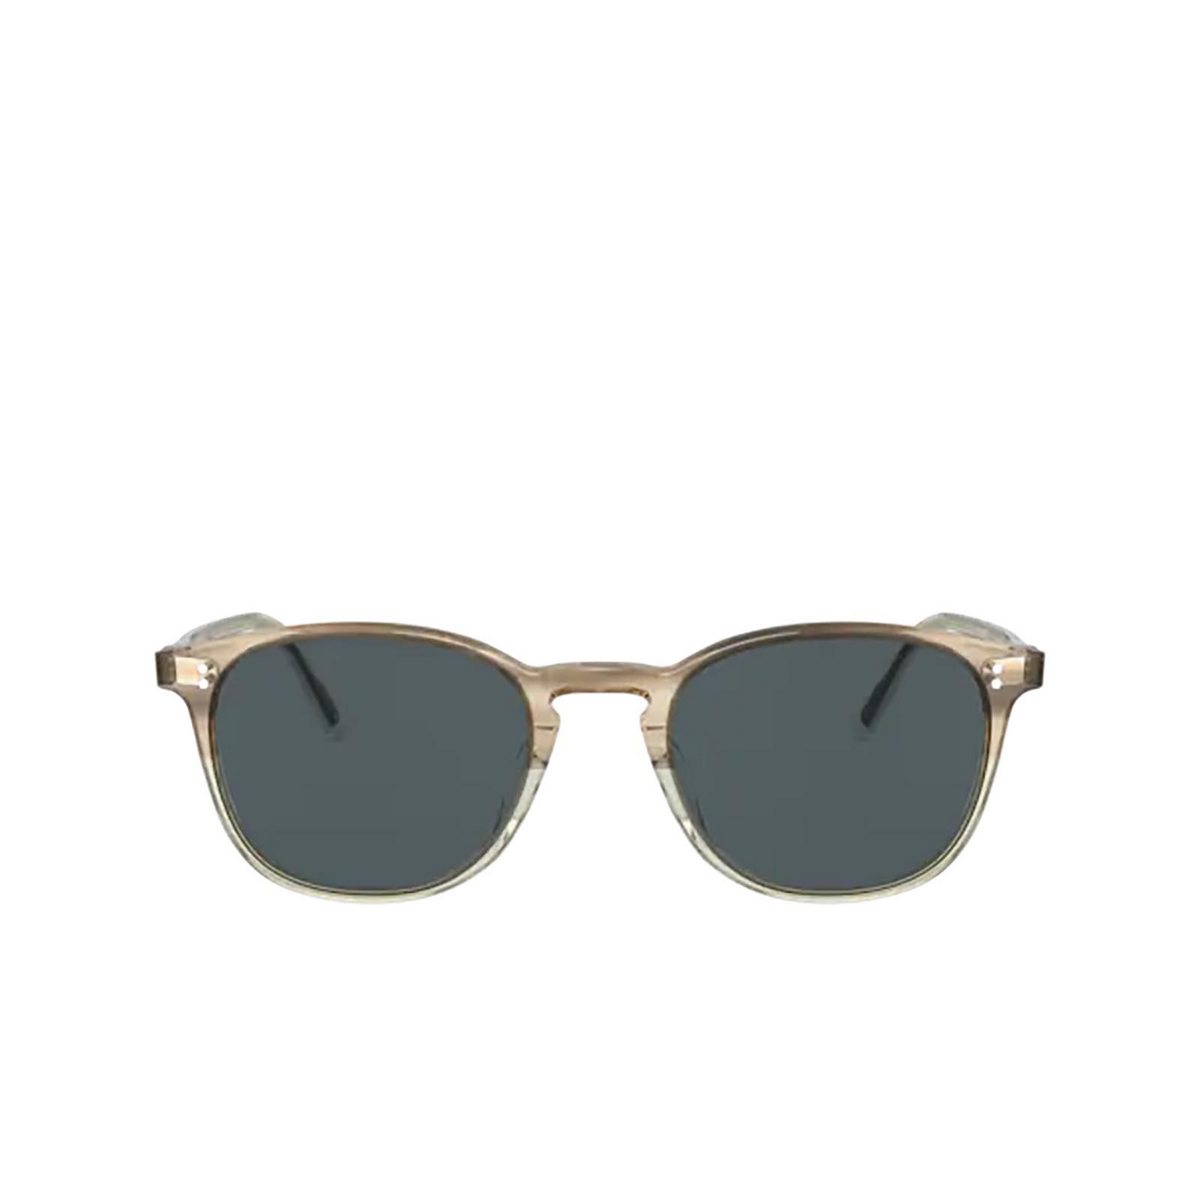 Occhiali da sole Oliver Peoples FINLEY VINTAGE 1647R5 Military VSB - frontale